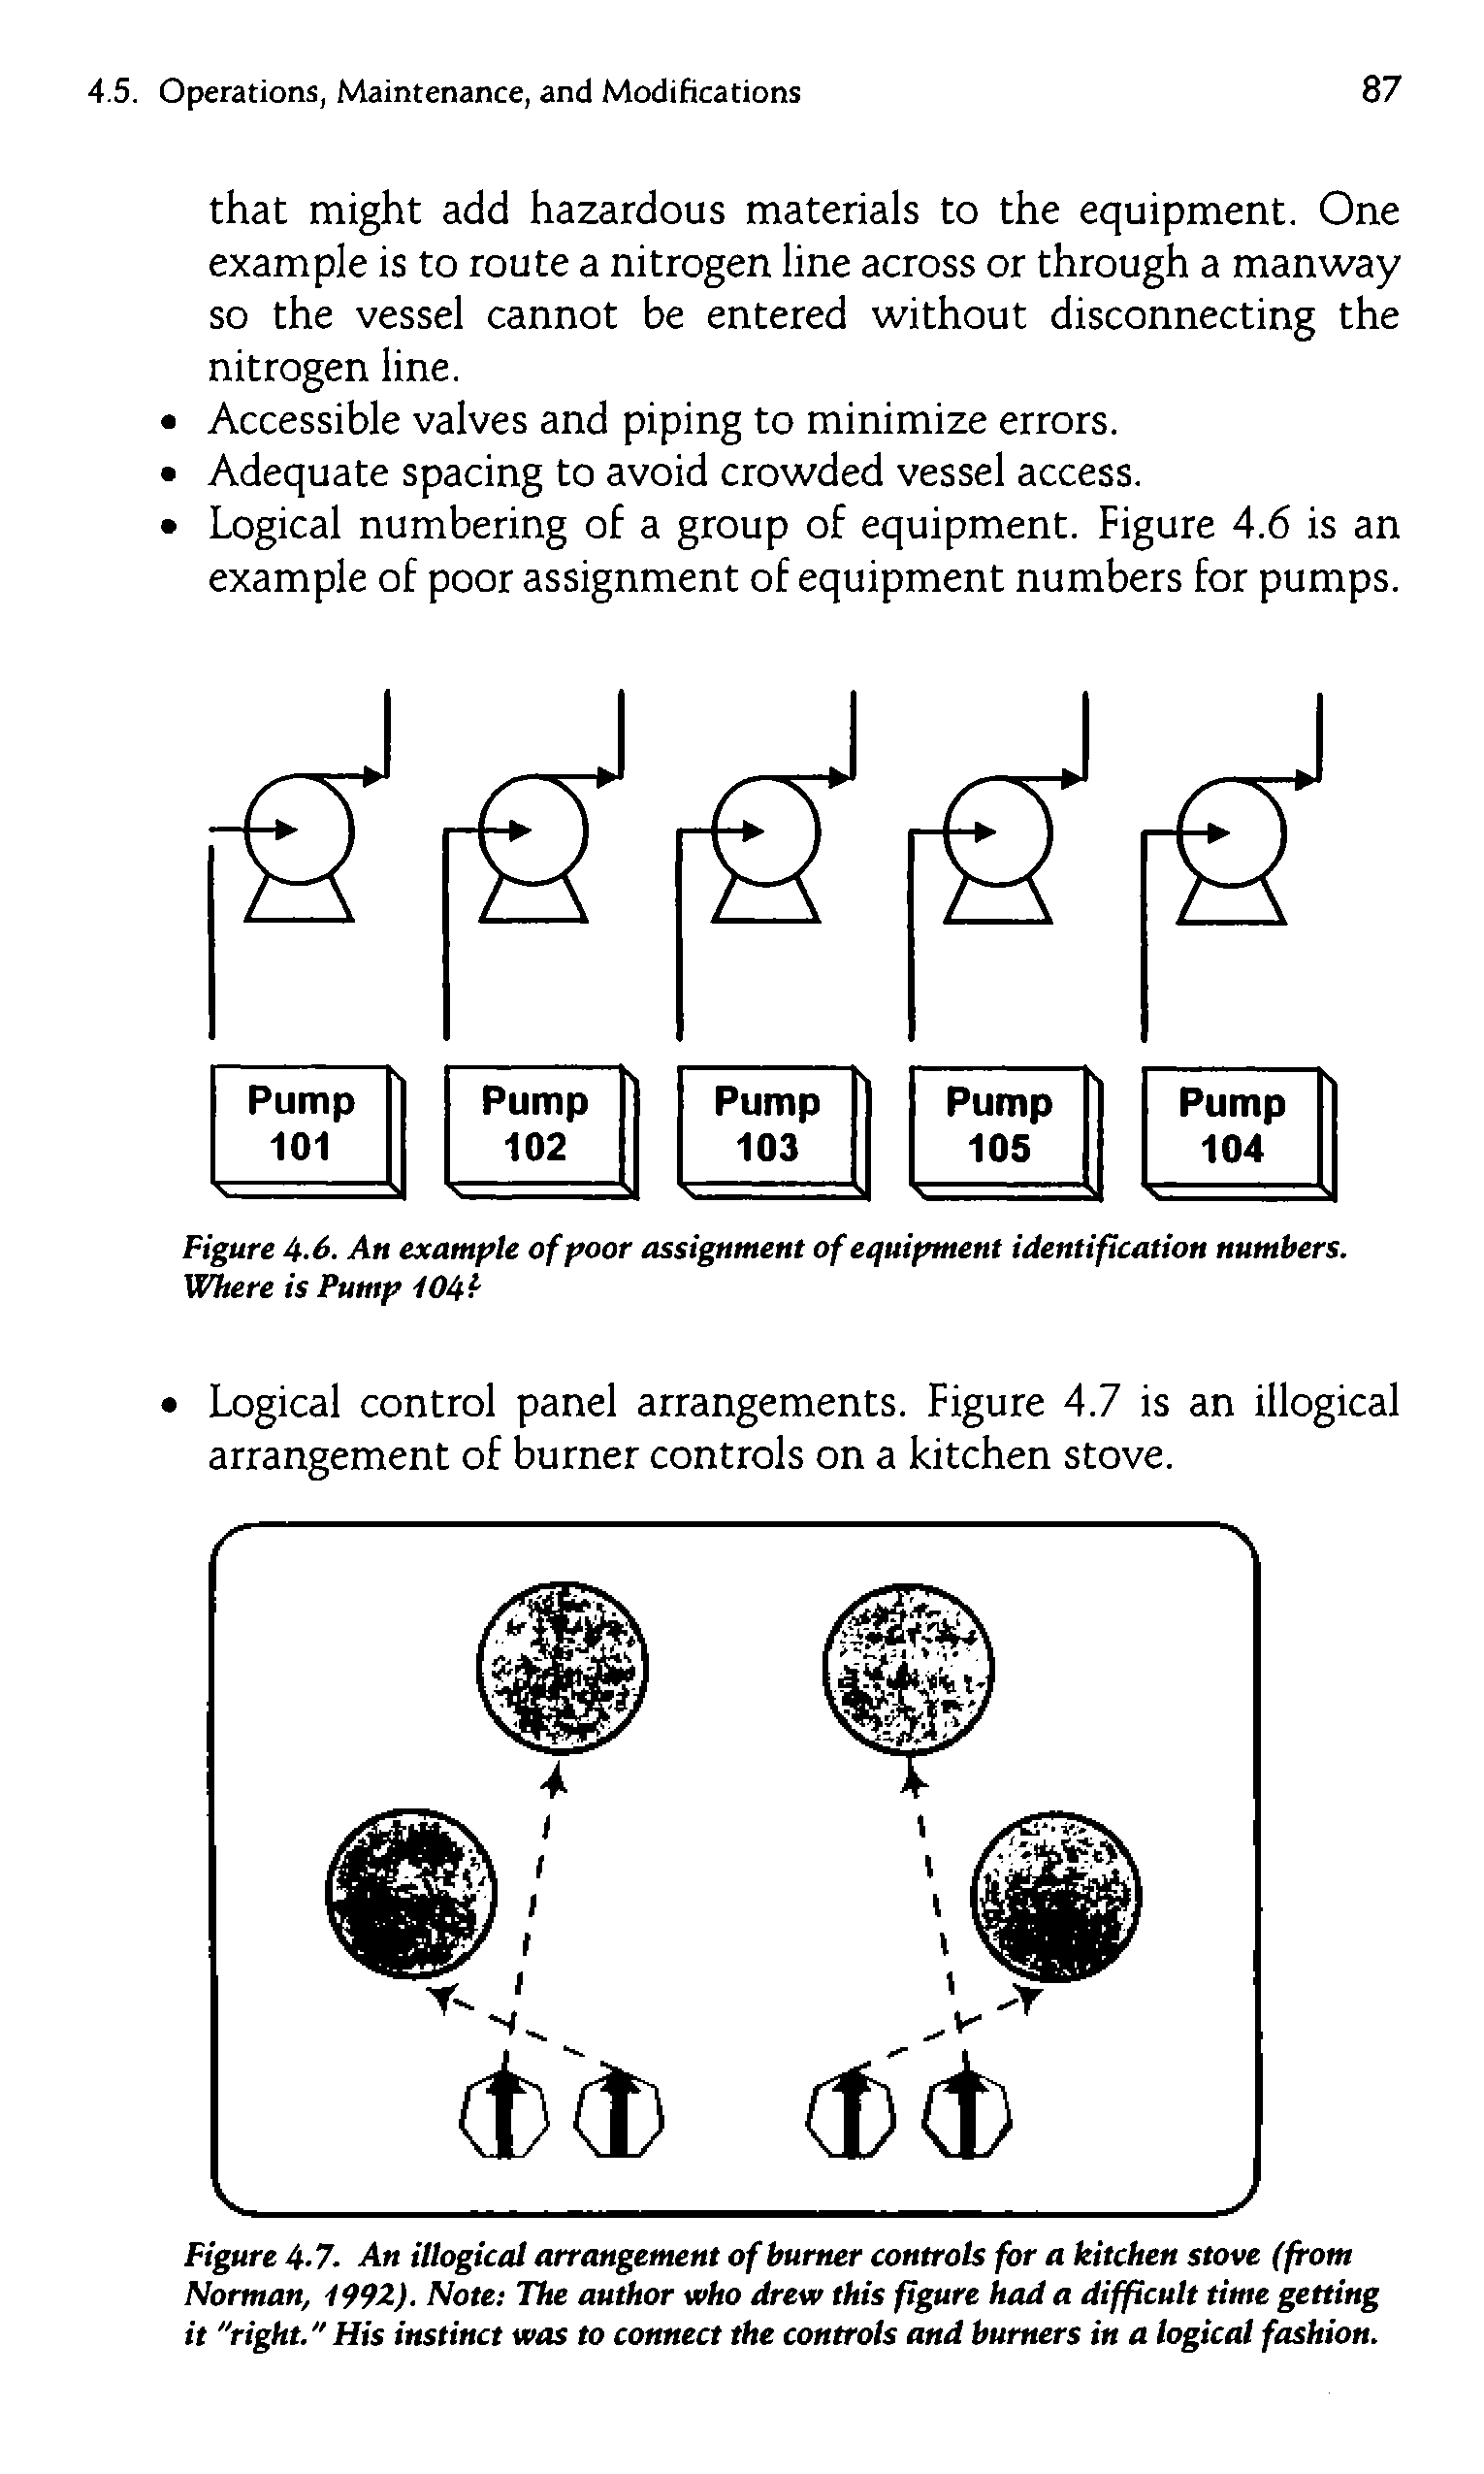 Figure 4-7. An illogical arrangement of burner controls for a kitchen stove (from Norman, 1992)- Note The author who drew this figure had a difficult time getting it "right."His instinct was to connect the controls and burners in a logical fashion.